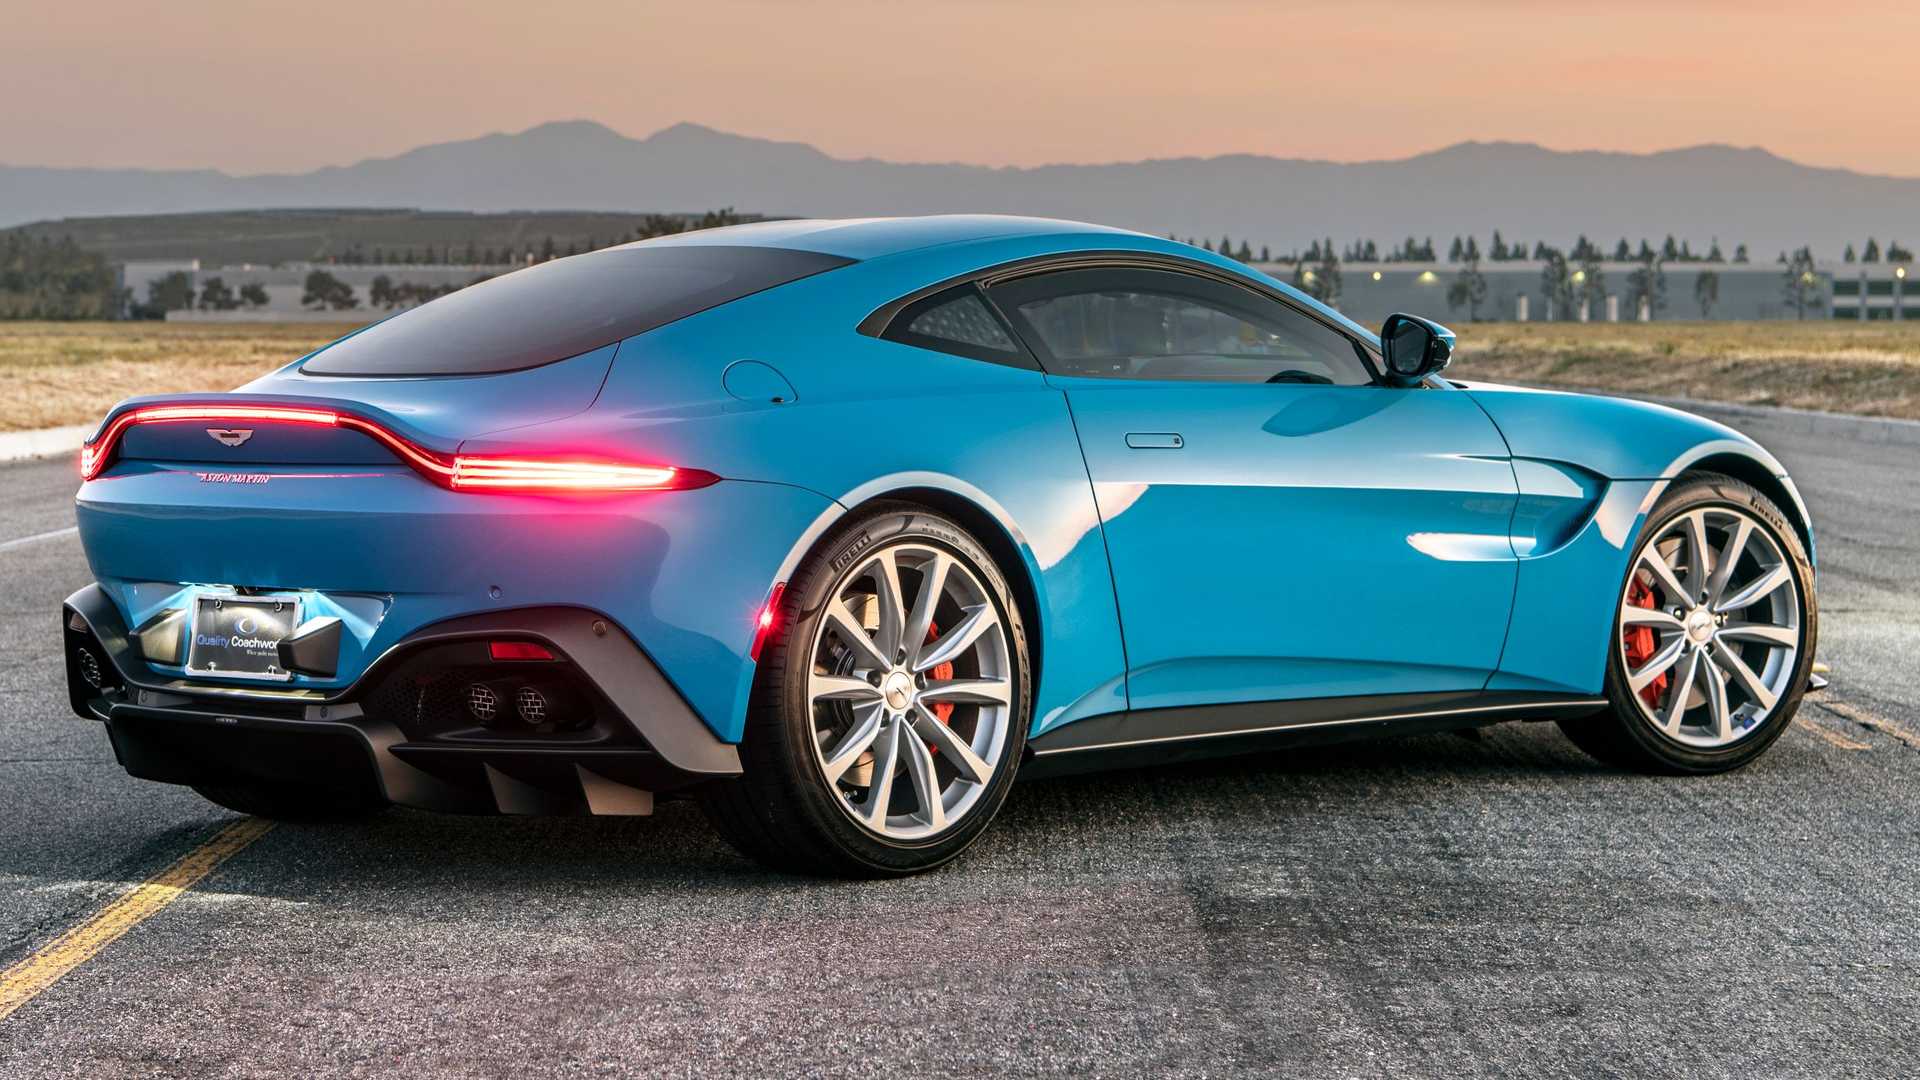 This Aston Martin Vantage is actually a fortress